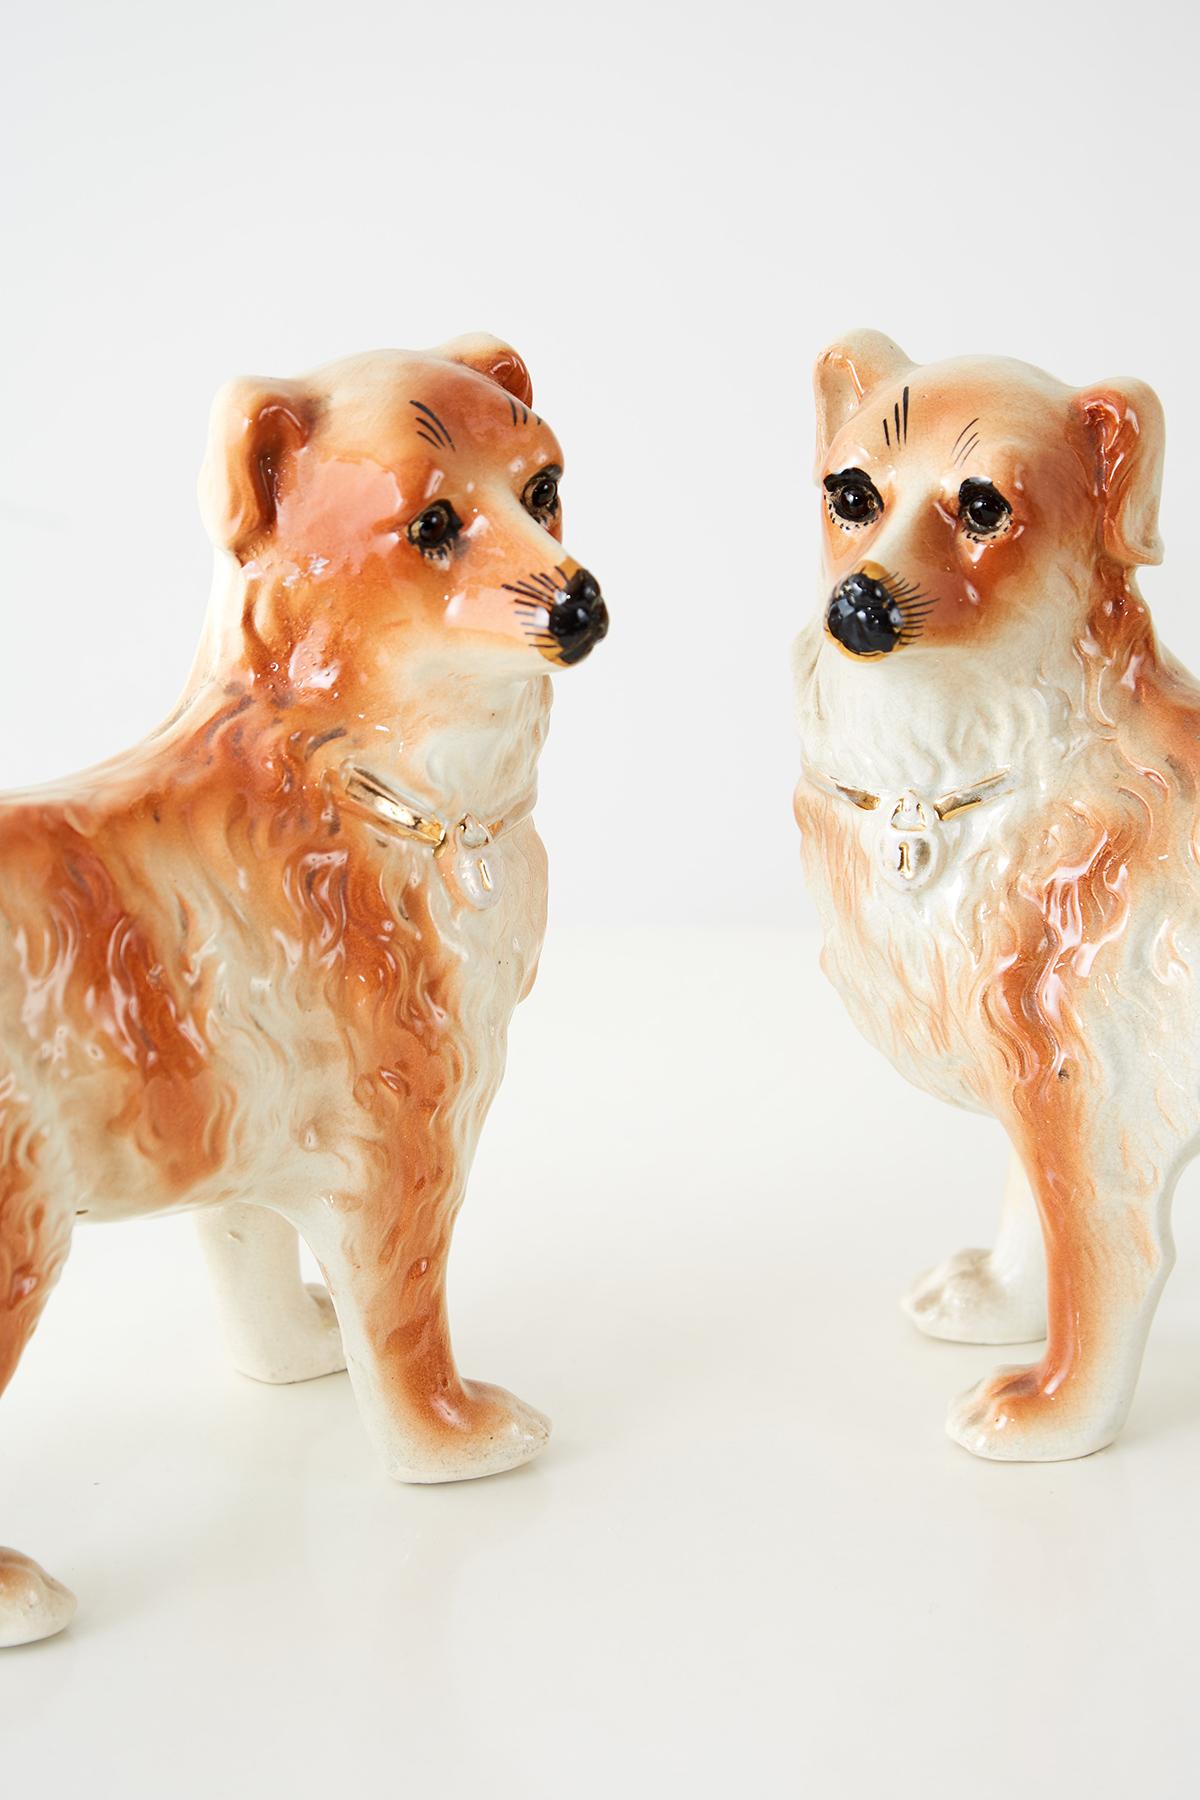 Lovely pair of English Staffordshire dogs depicted standing. Decorated with beautiful wavy fur and delicate faces. Each has a gilt collar and a rich orangish glaze. The bottoms have a faint craquelure detail in the finish.